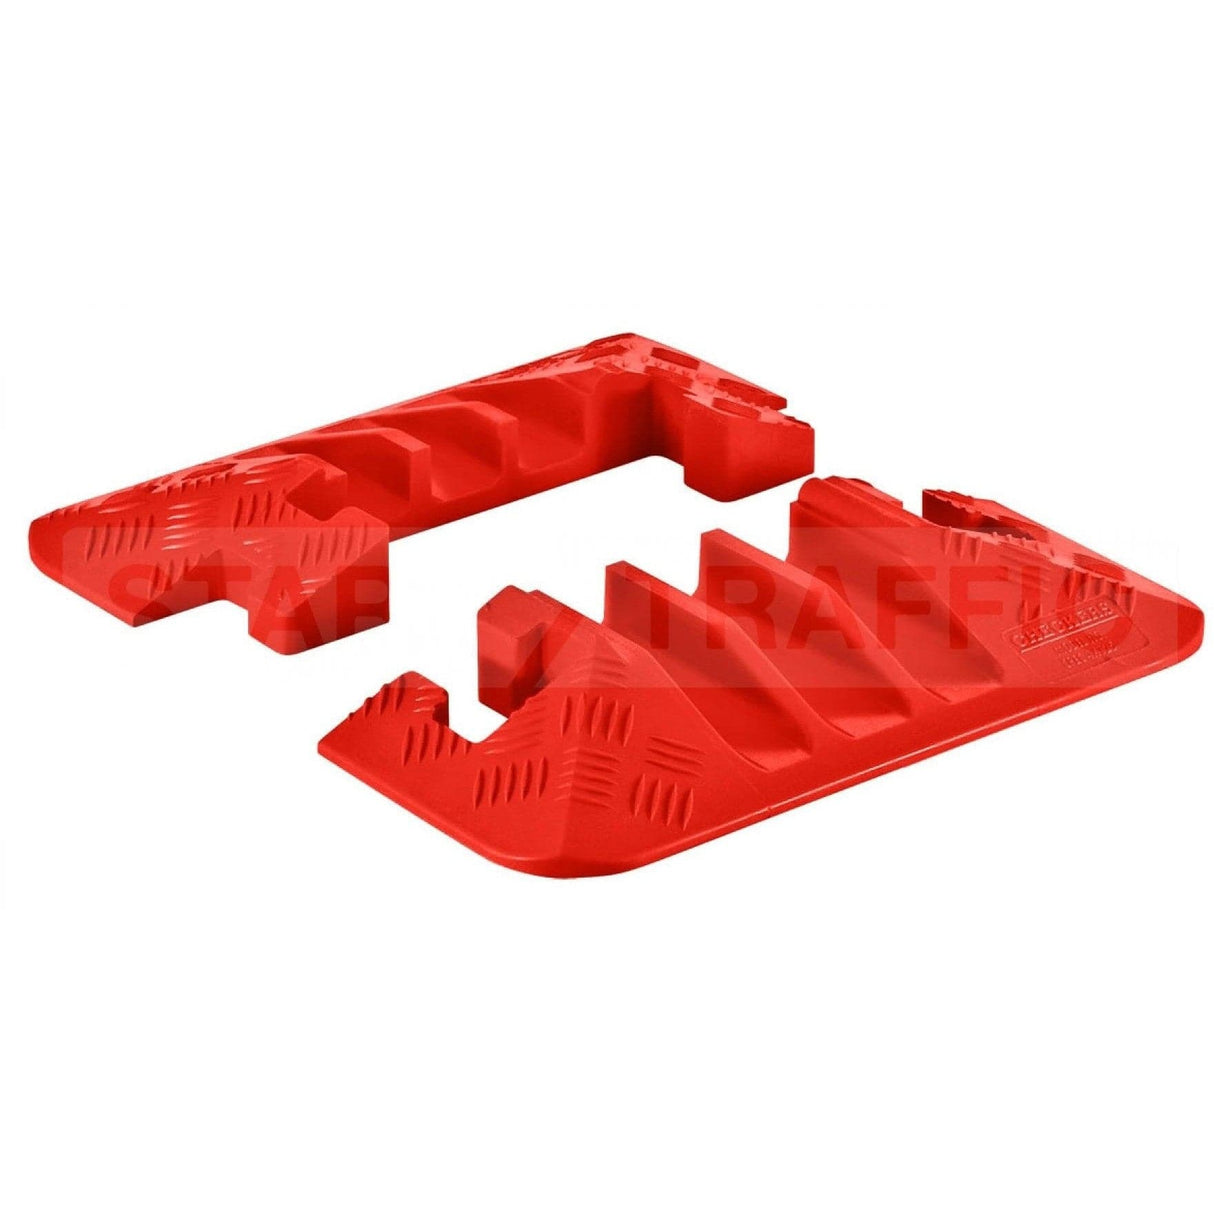 Checkers 3 Channel End Cap Cable Protector - Checkers - Ramp Champ